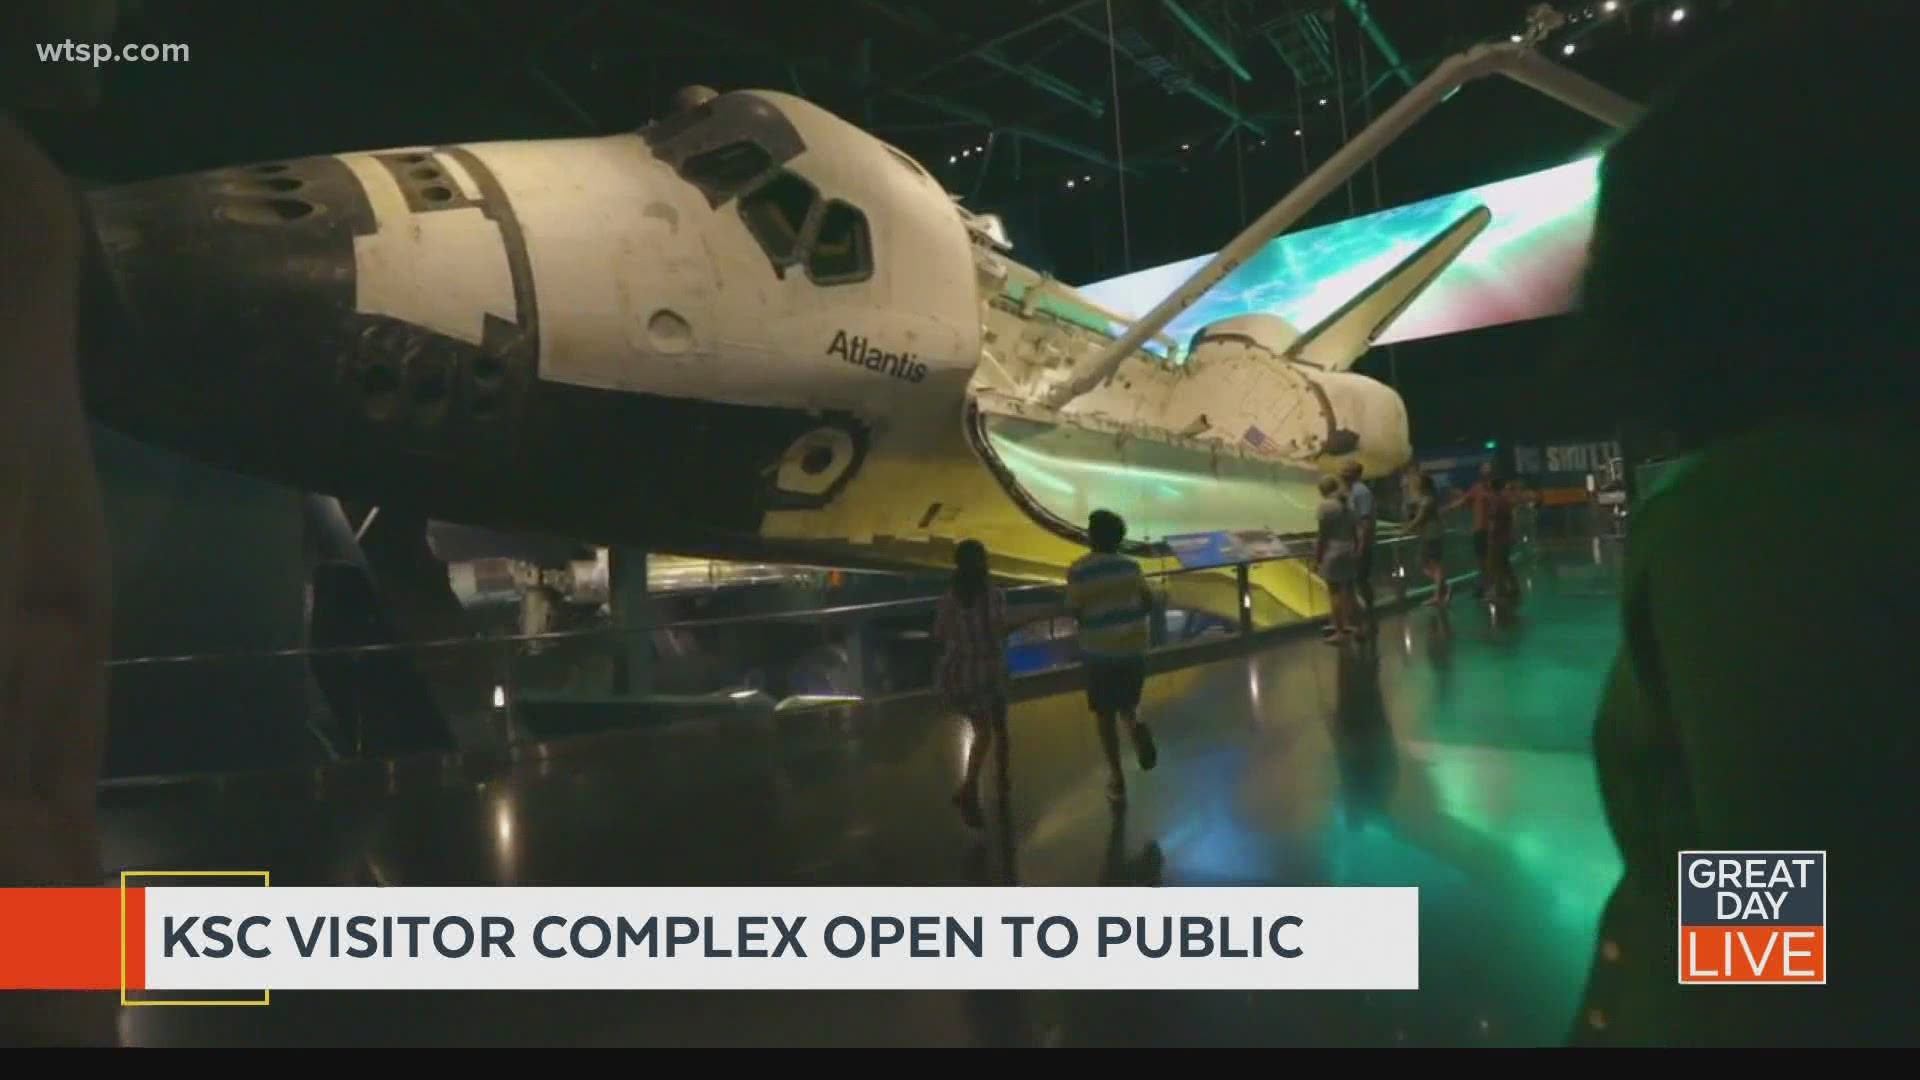 KSC Visitor Complex has reopened